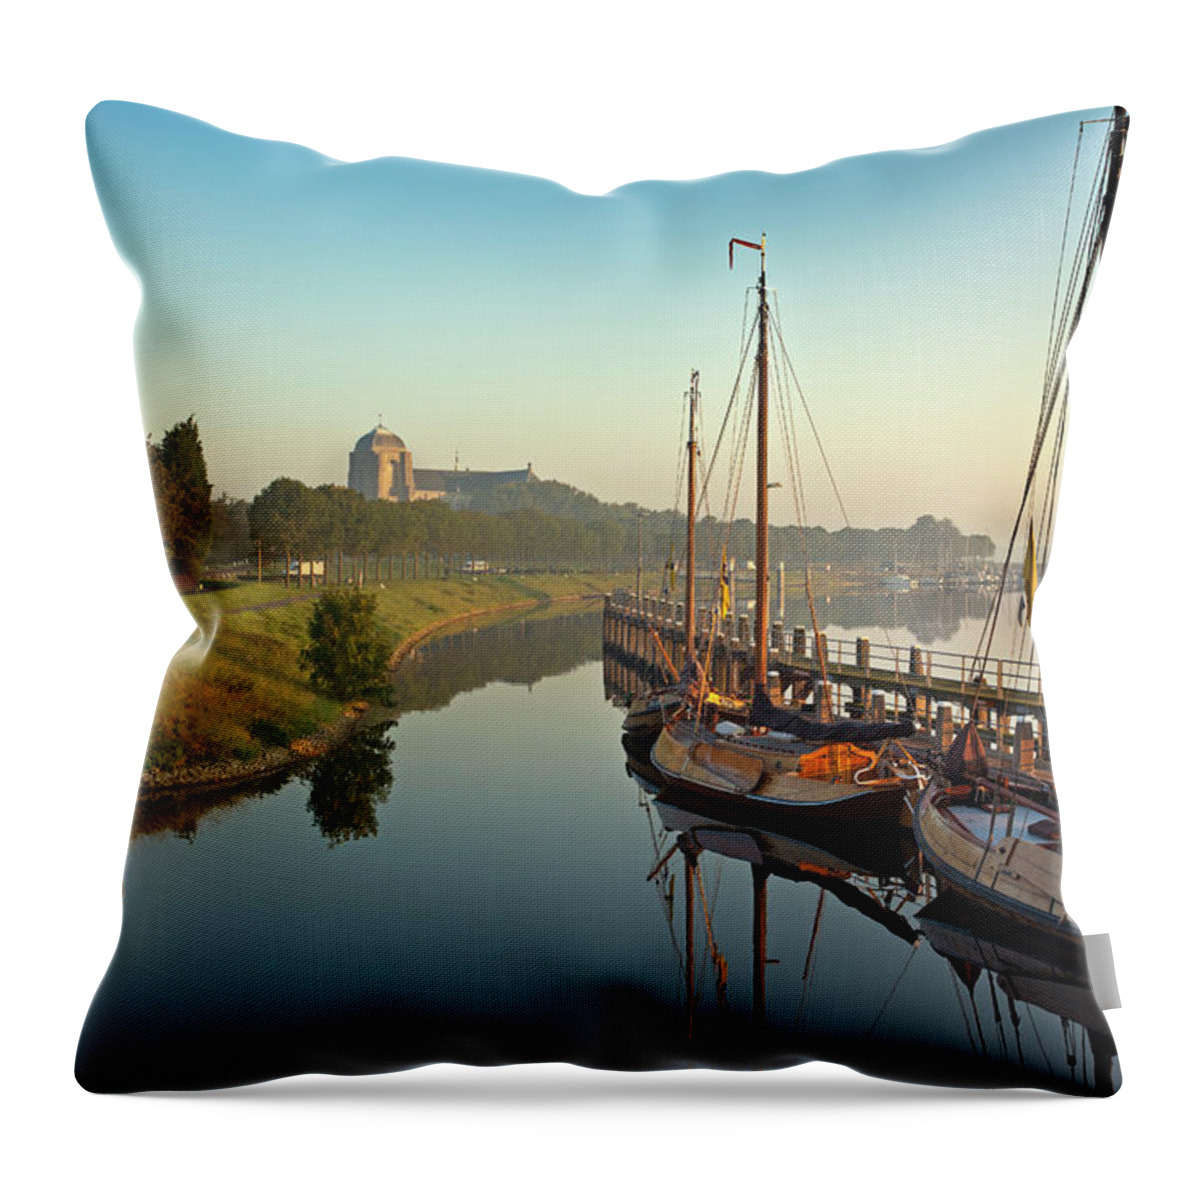 Sailboat Throw Pillow featuring the photograph Netherlands, Veere, Harbour by Frans Lemmens